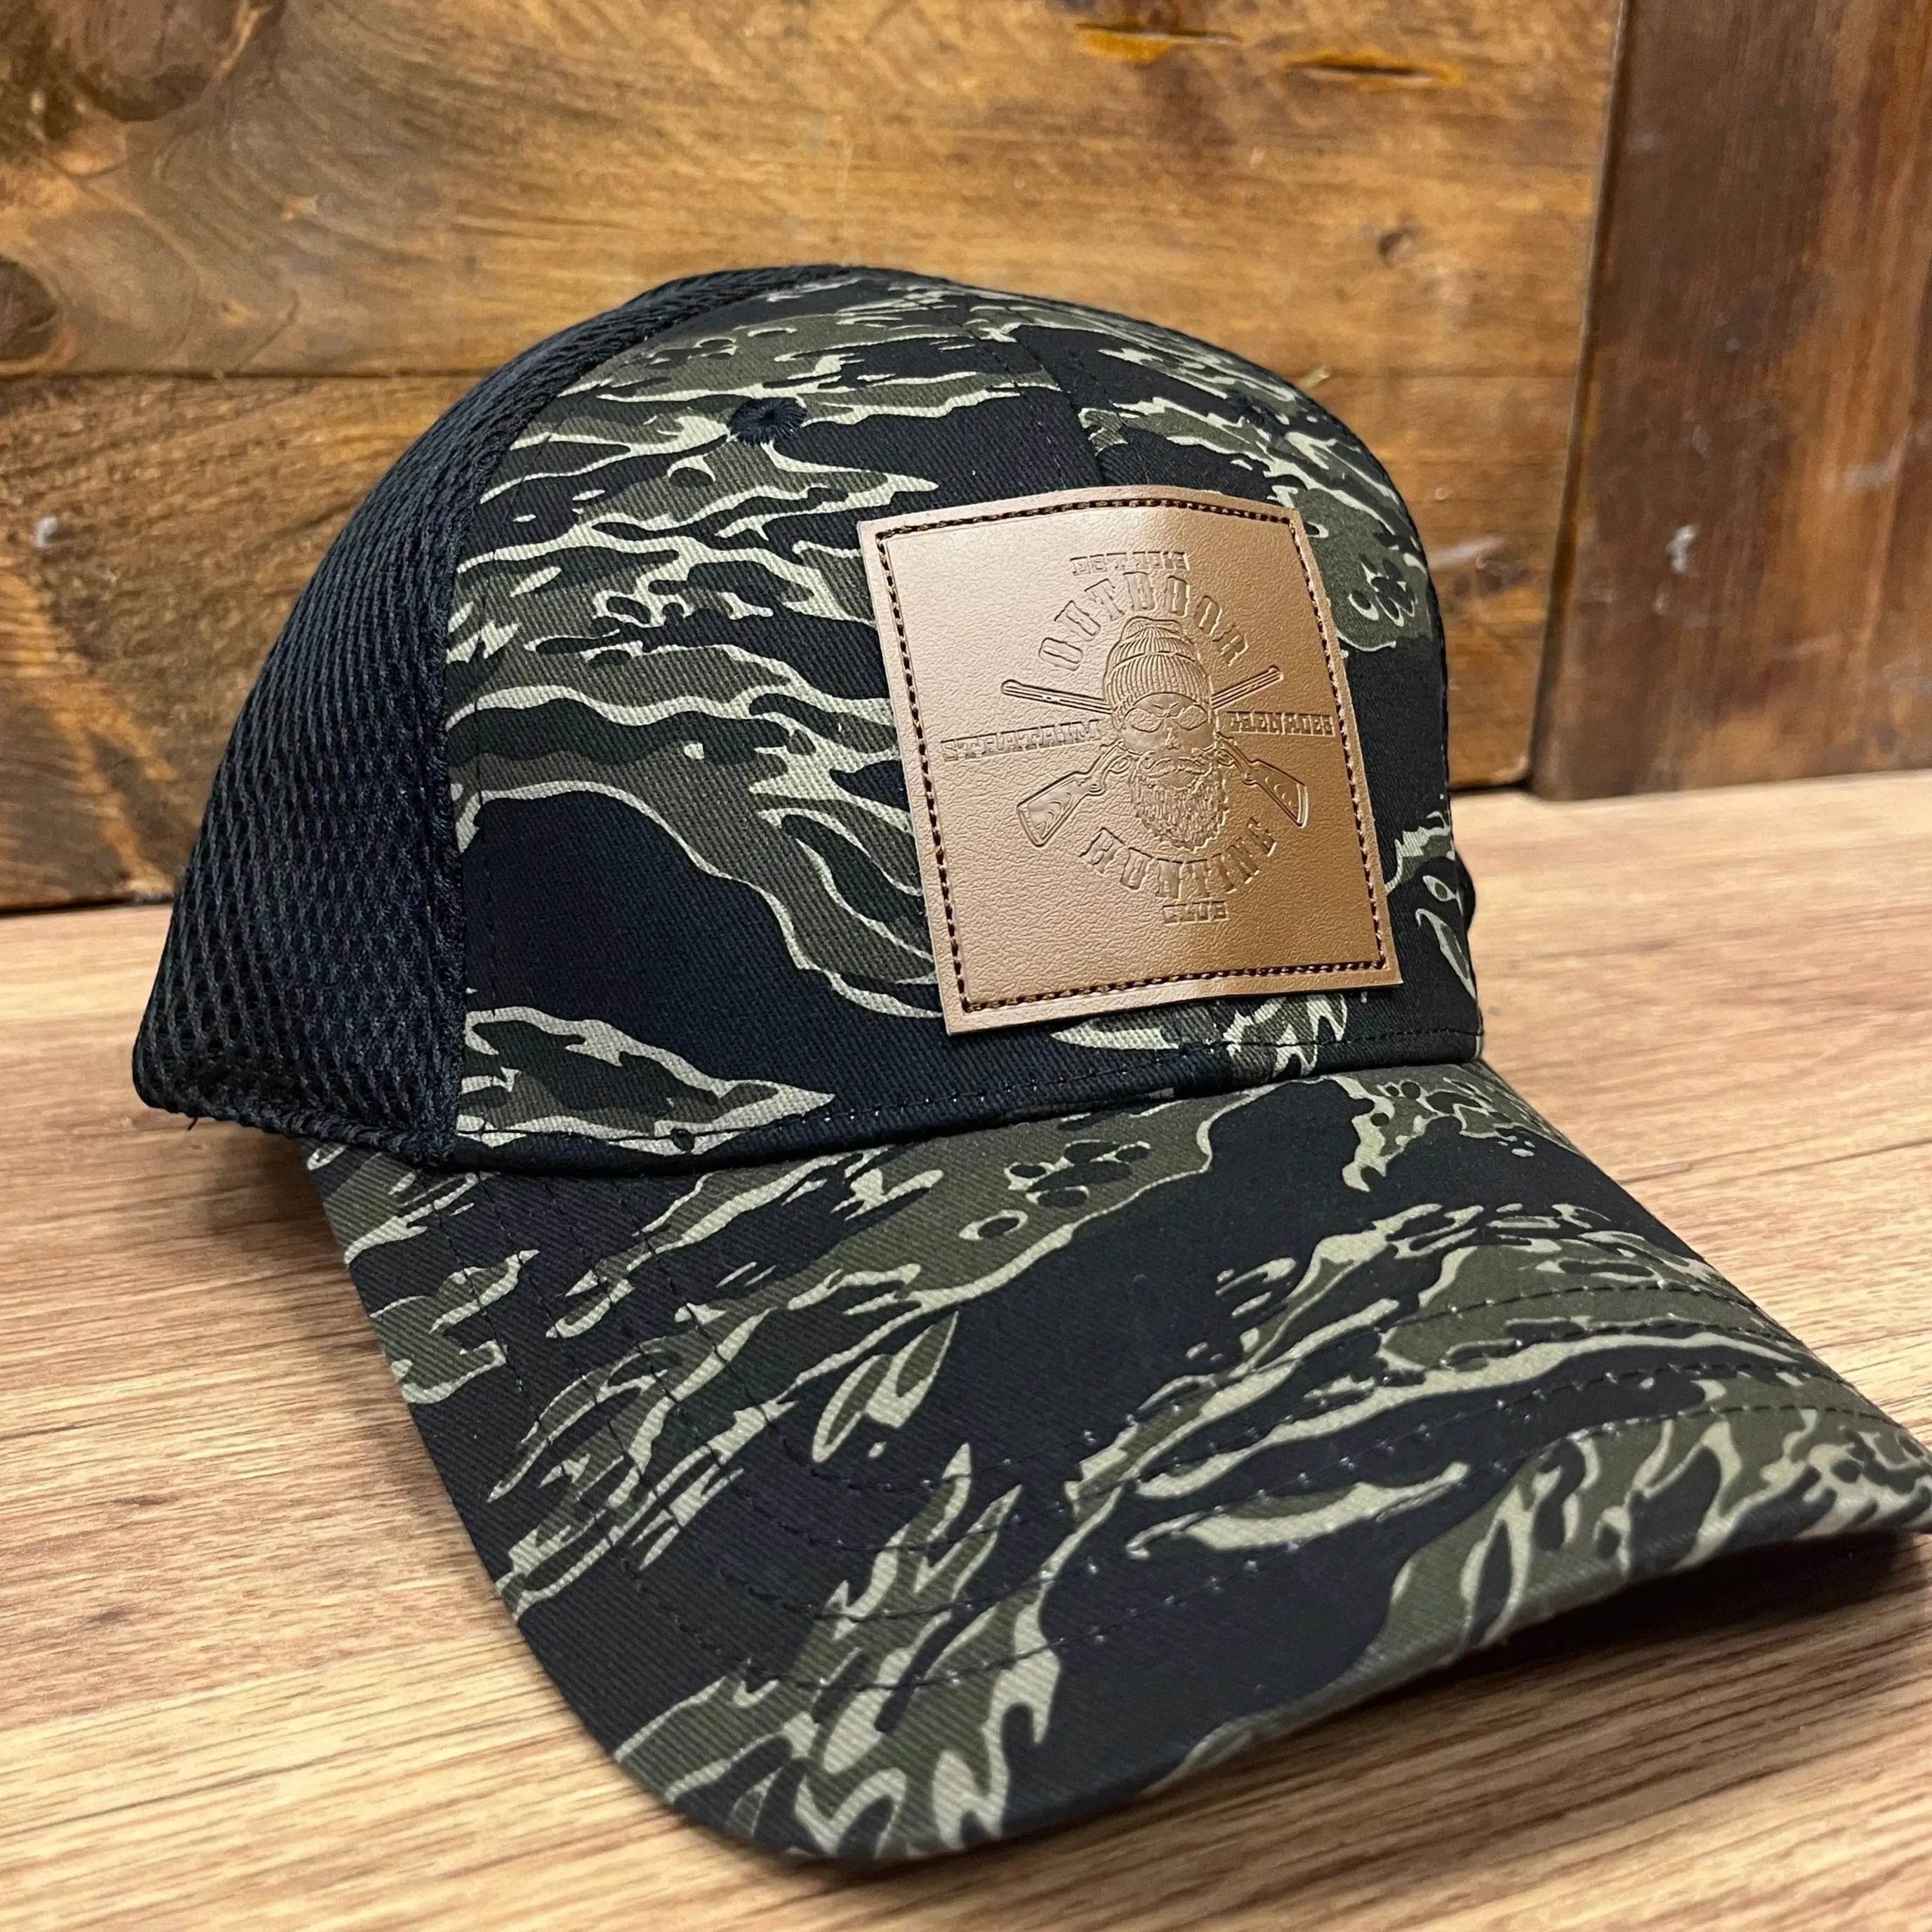 StratAIM Hunting Club Tigerstripe Baseball Cap on a wooden surface, highlighting the unique camo pattern.